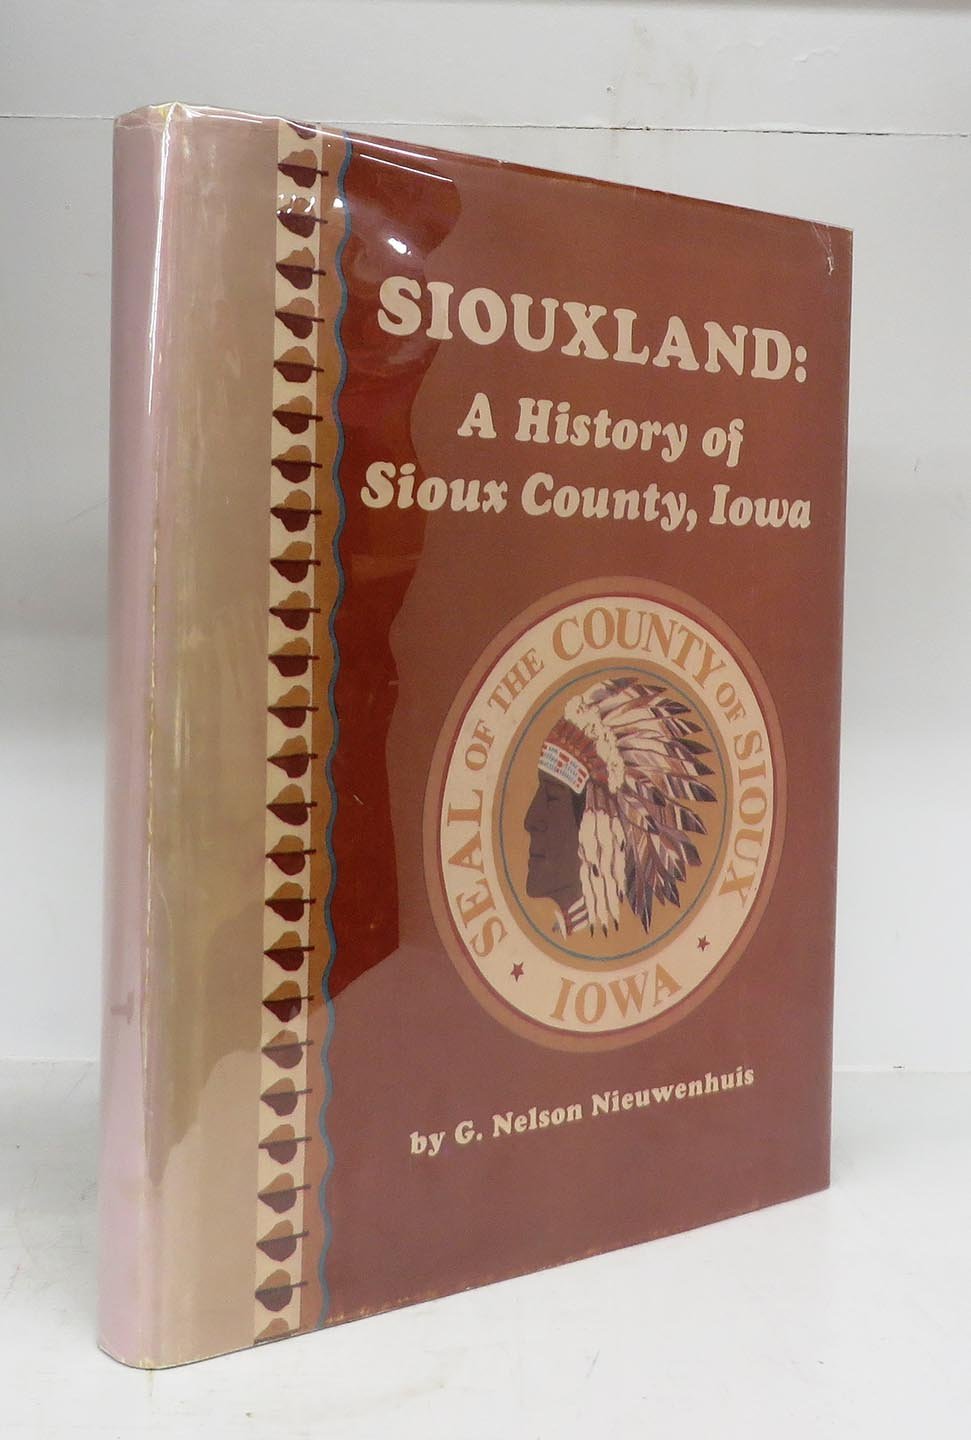 Siouxland: A History of Sioux County, Iowa